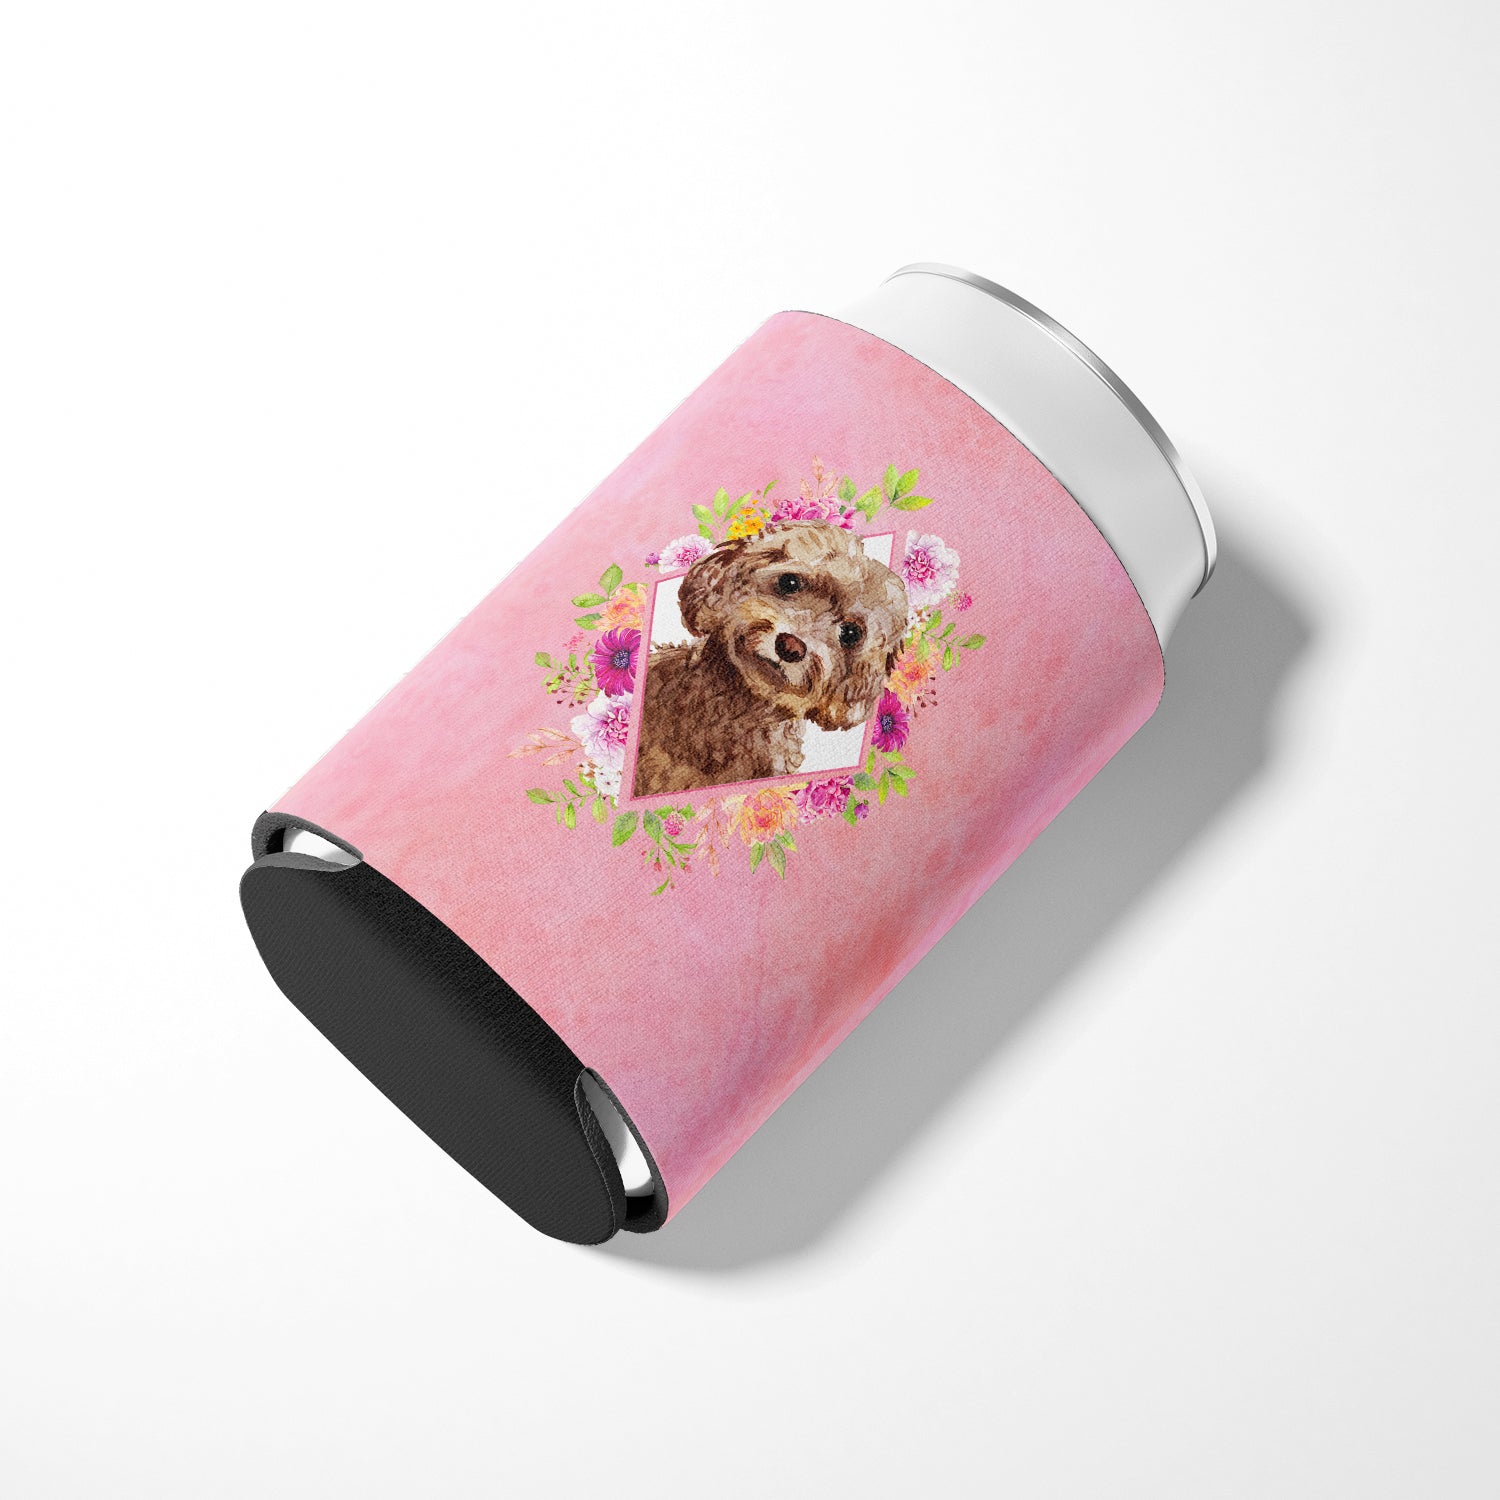 Chocolate Cockapoo Pink Flowers Can or Bottle Hugger CK4253CC